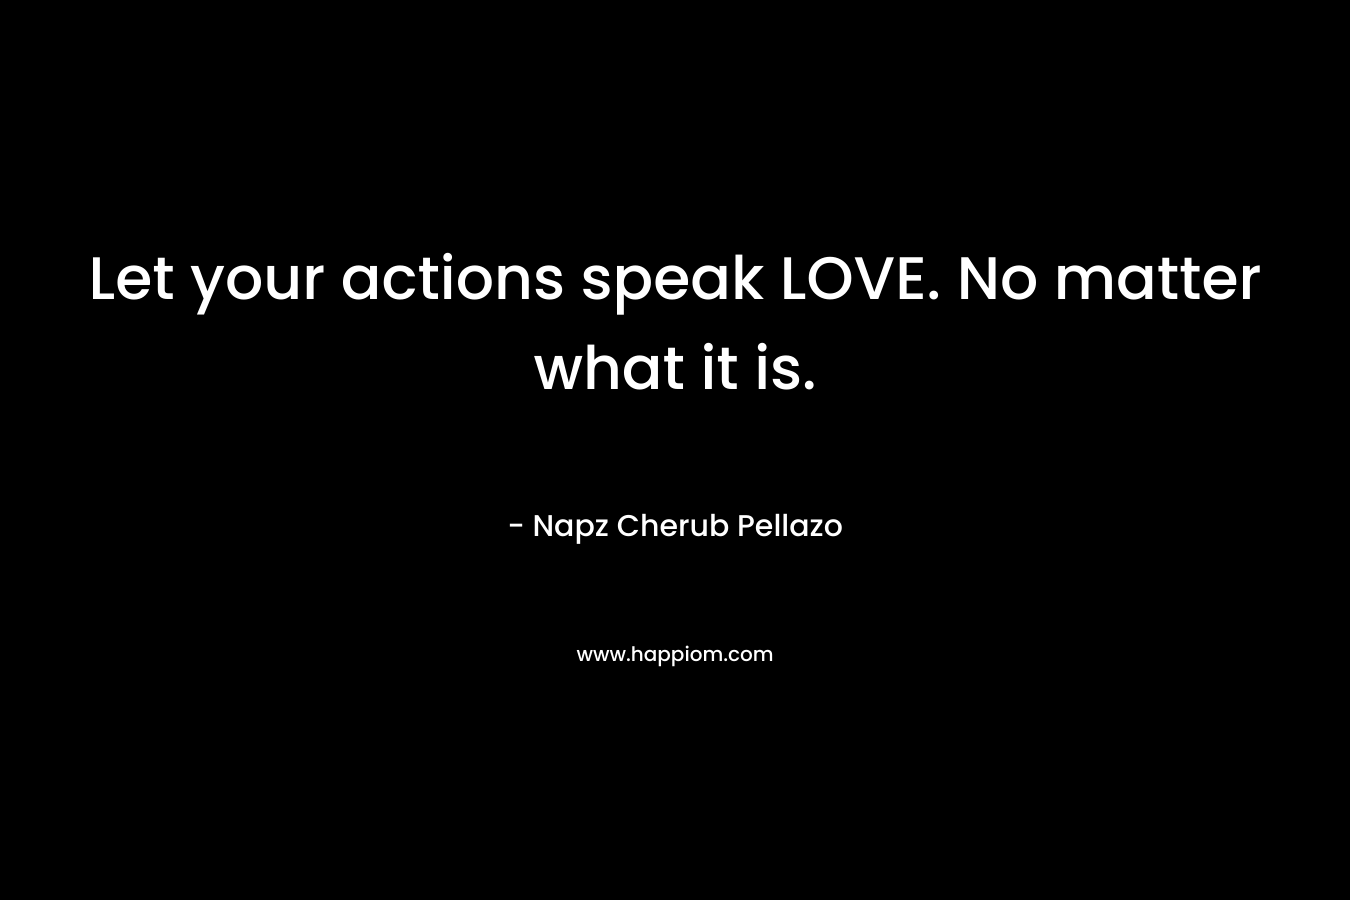 Let your actions speak LOVE. No matter what it is.